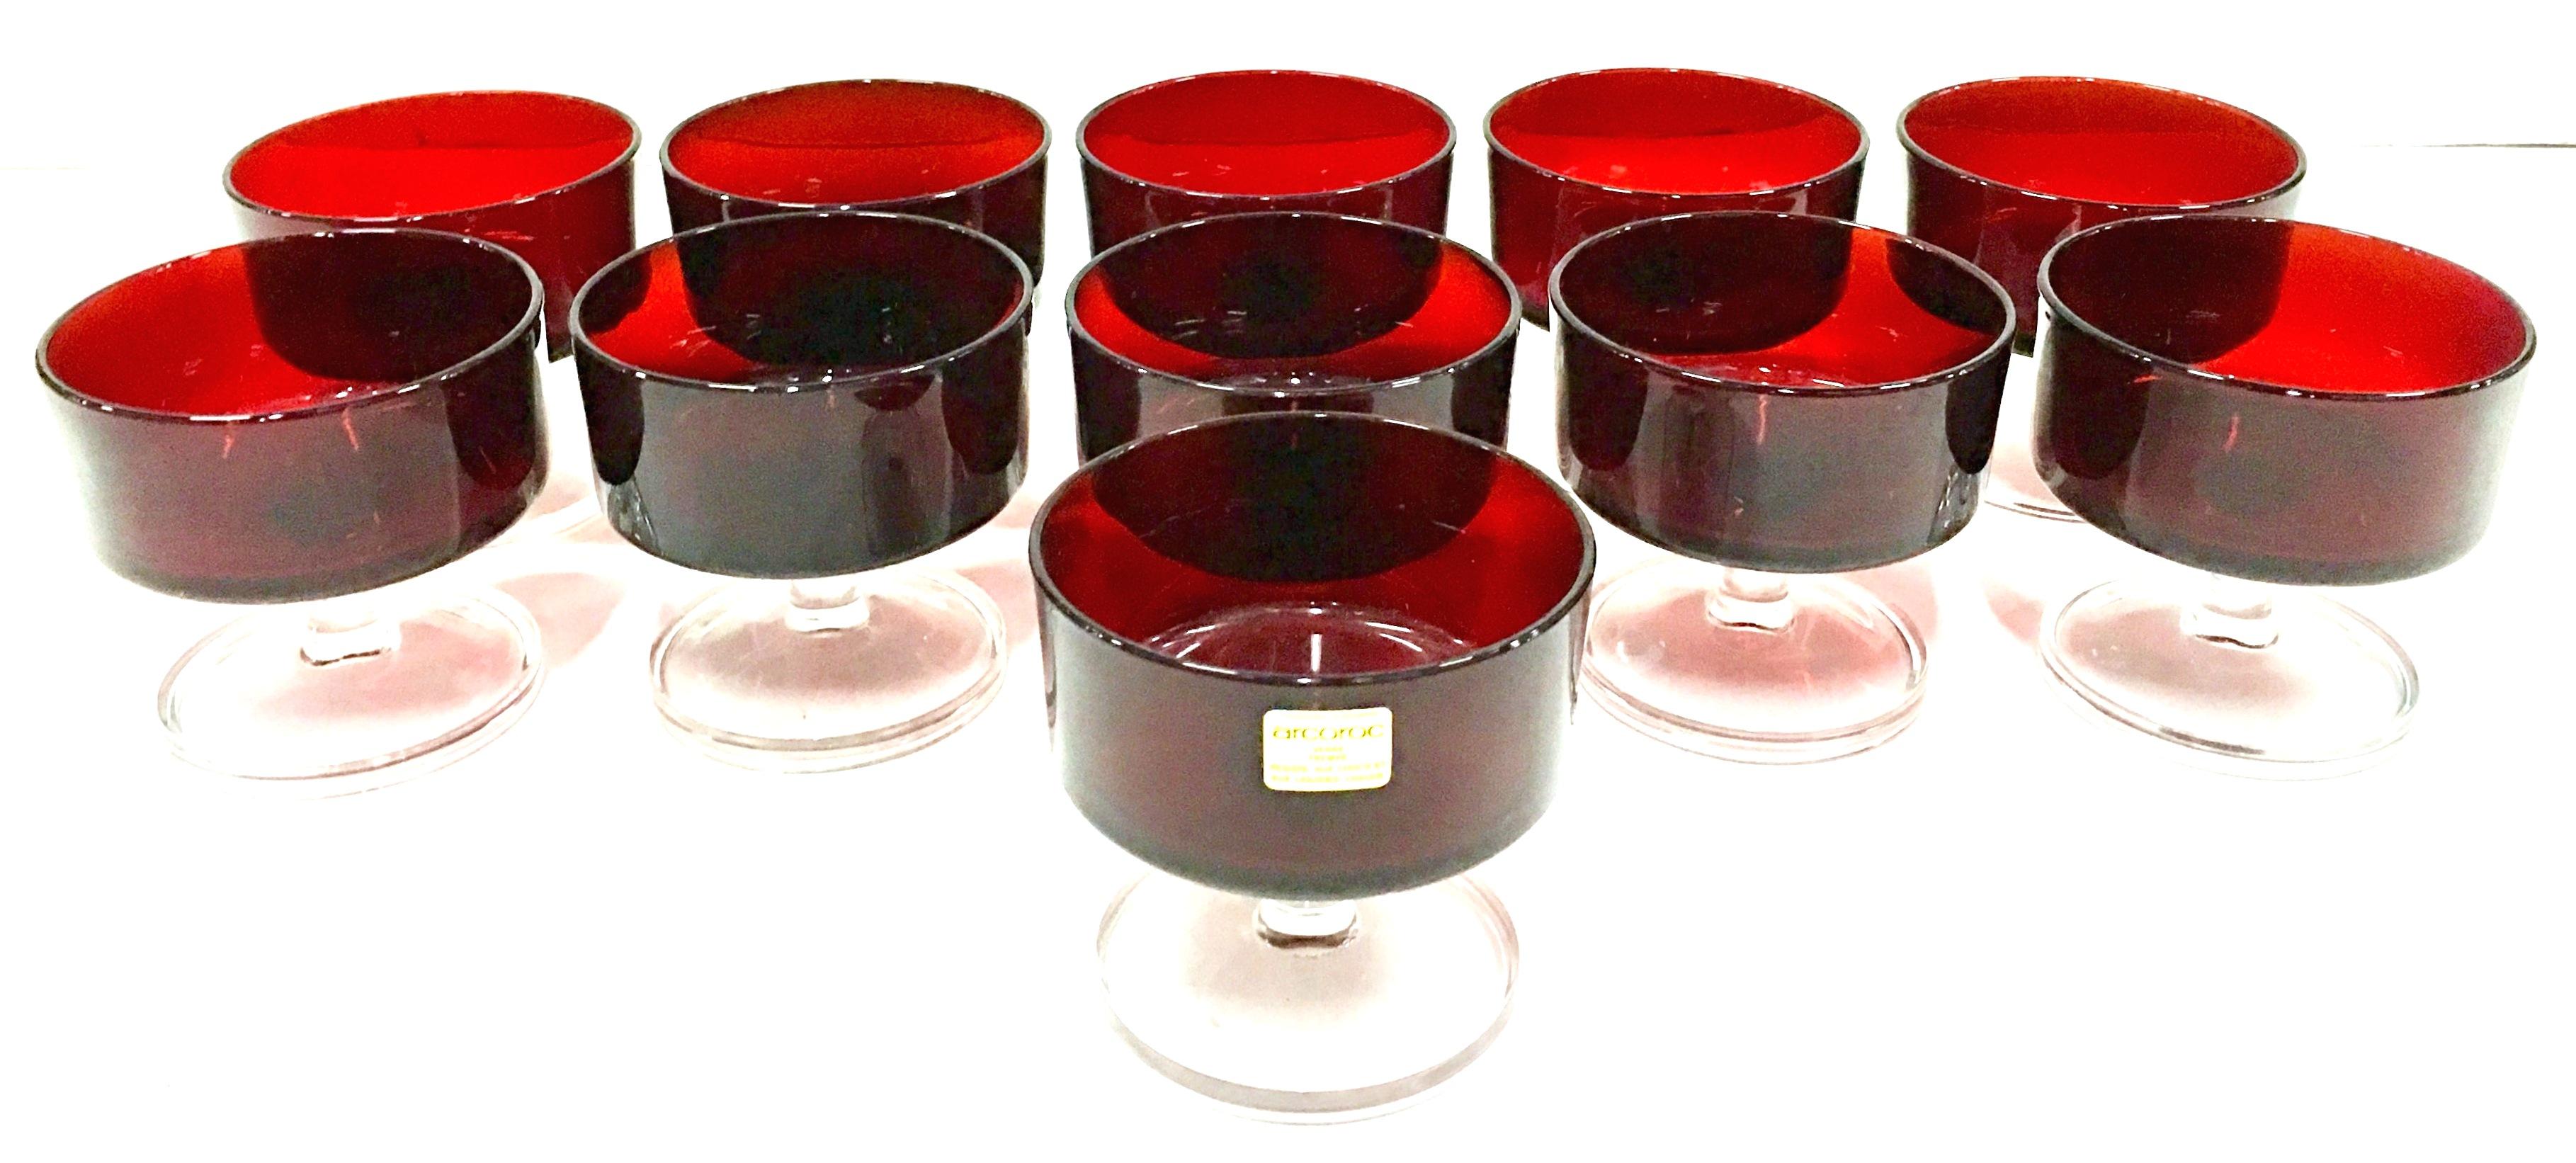 1970'S French ruby red and clear footed stem coveted coupe glasses by, Arcoroc. These glasses appear to be new and two of the eleven pieces maintain the original manufacturer sticker.